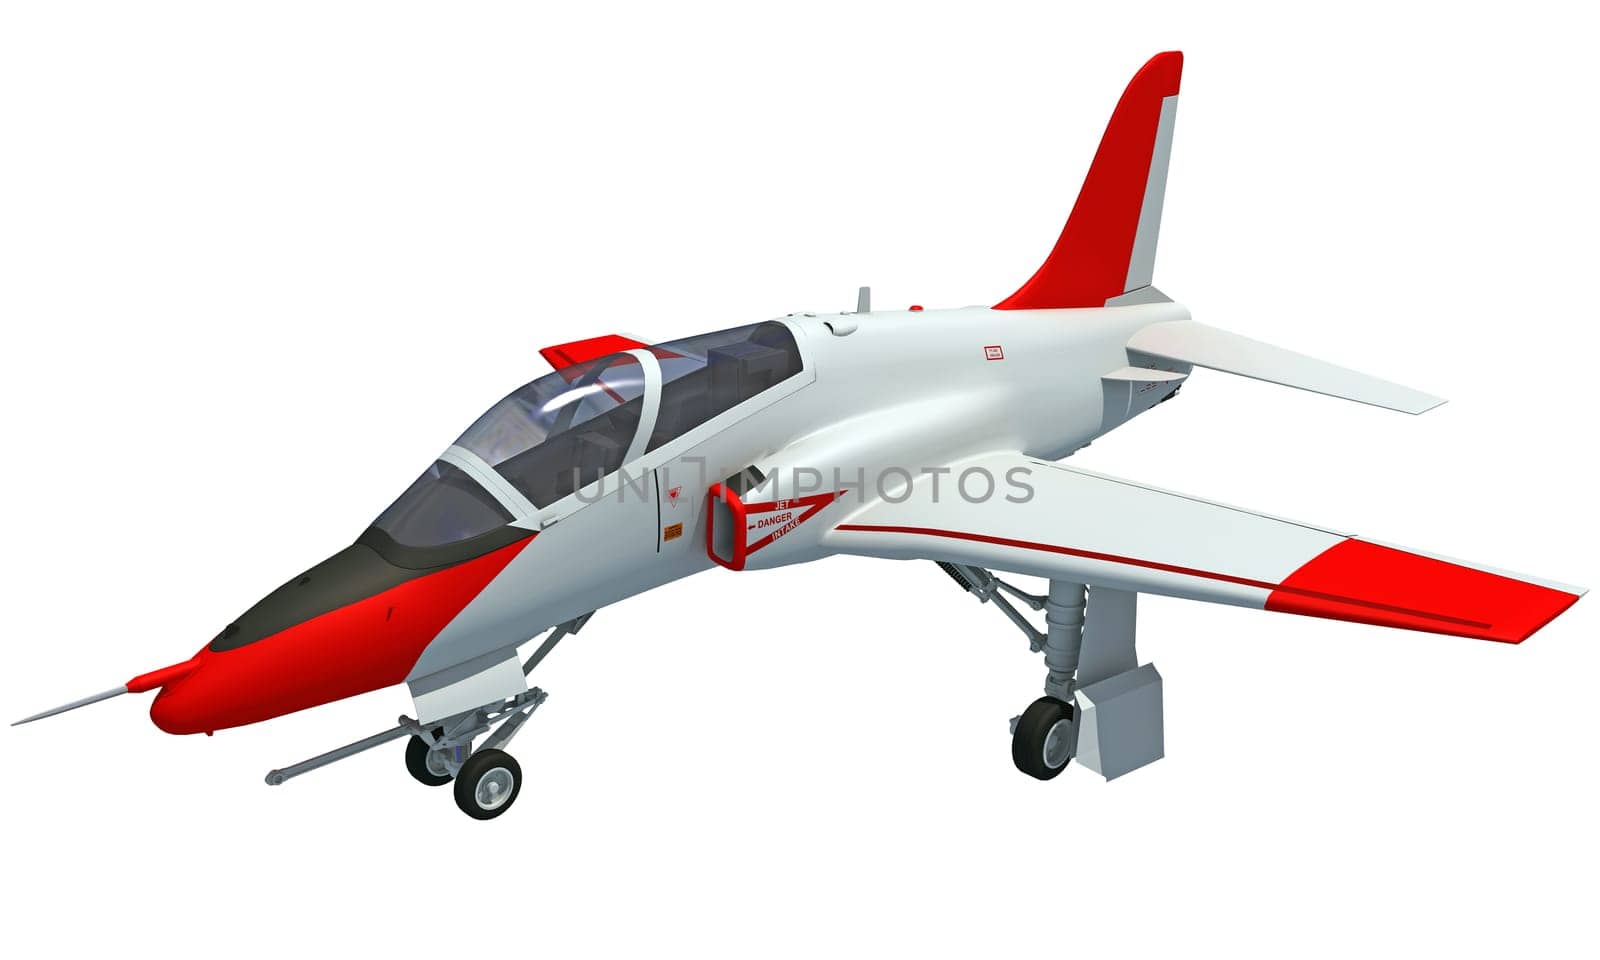 Jet airplane 3D rendering model on white background